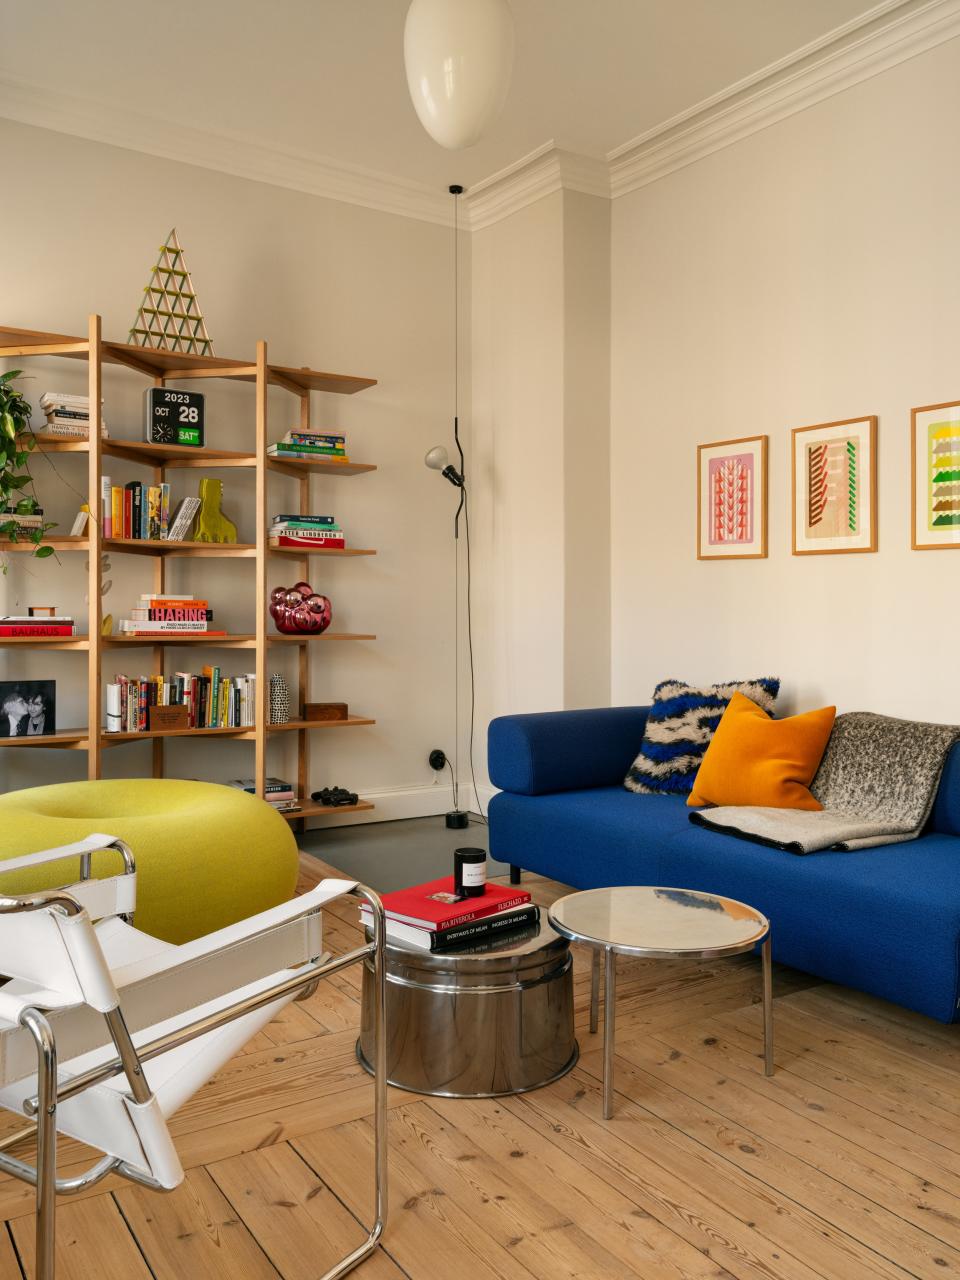 Hem furniture—like this cobalt Palo sofa—can be spotted throughout Cristina’s one-bedroom apartment.